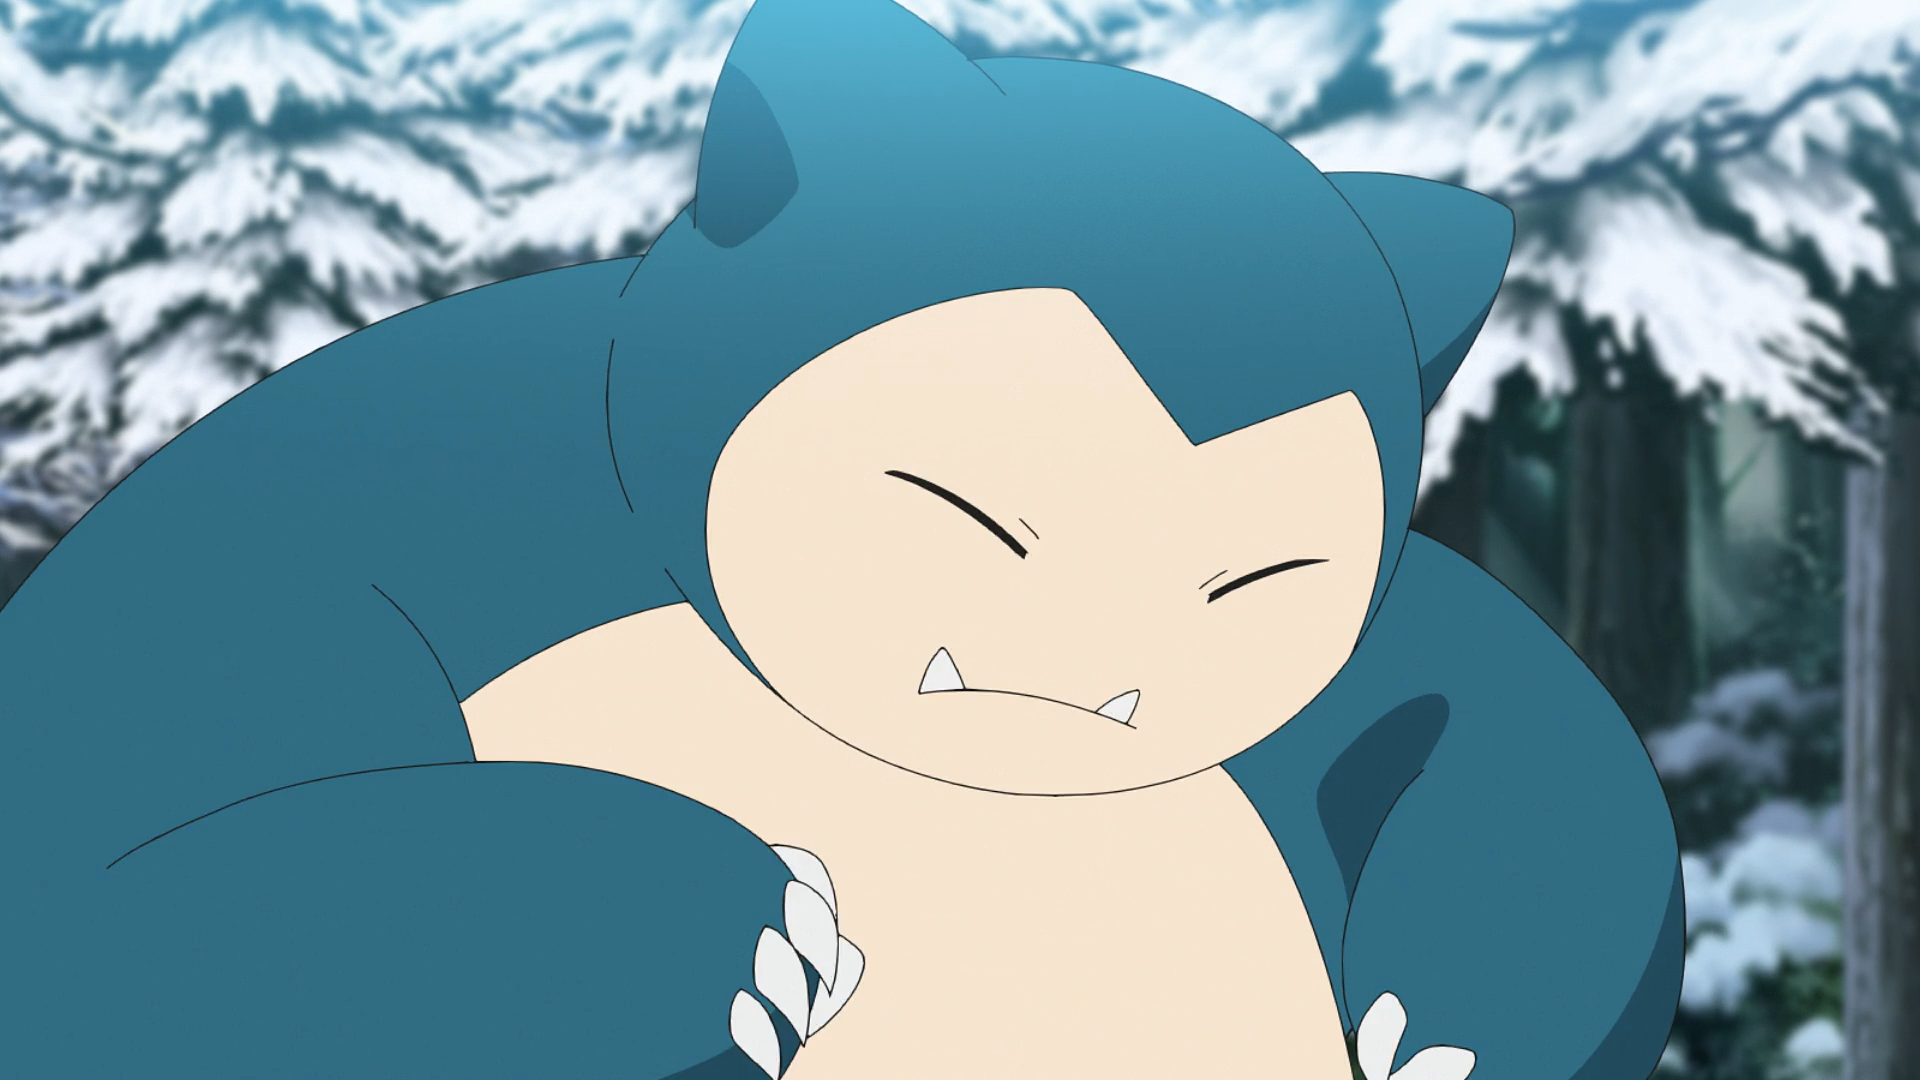 Pokémon's Snorlax Is Based on a Real Person